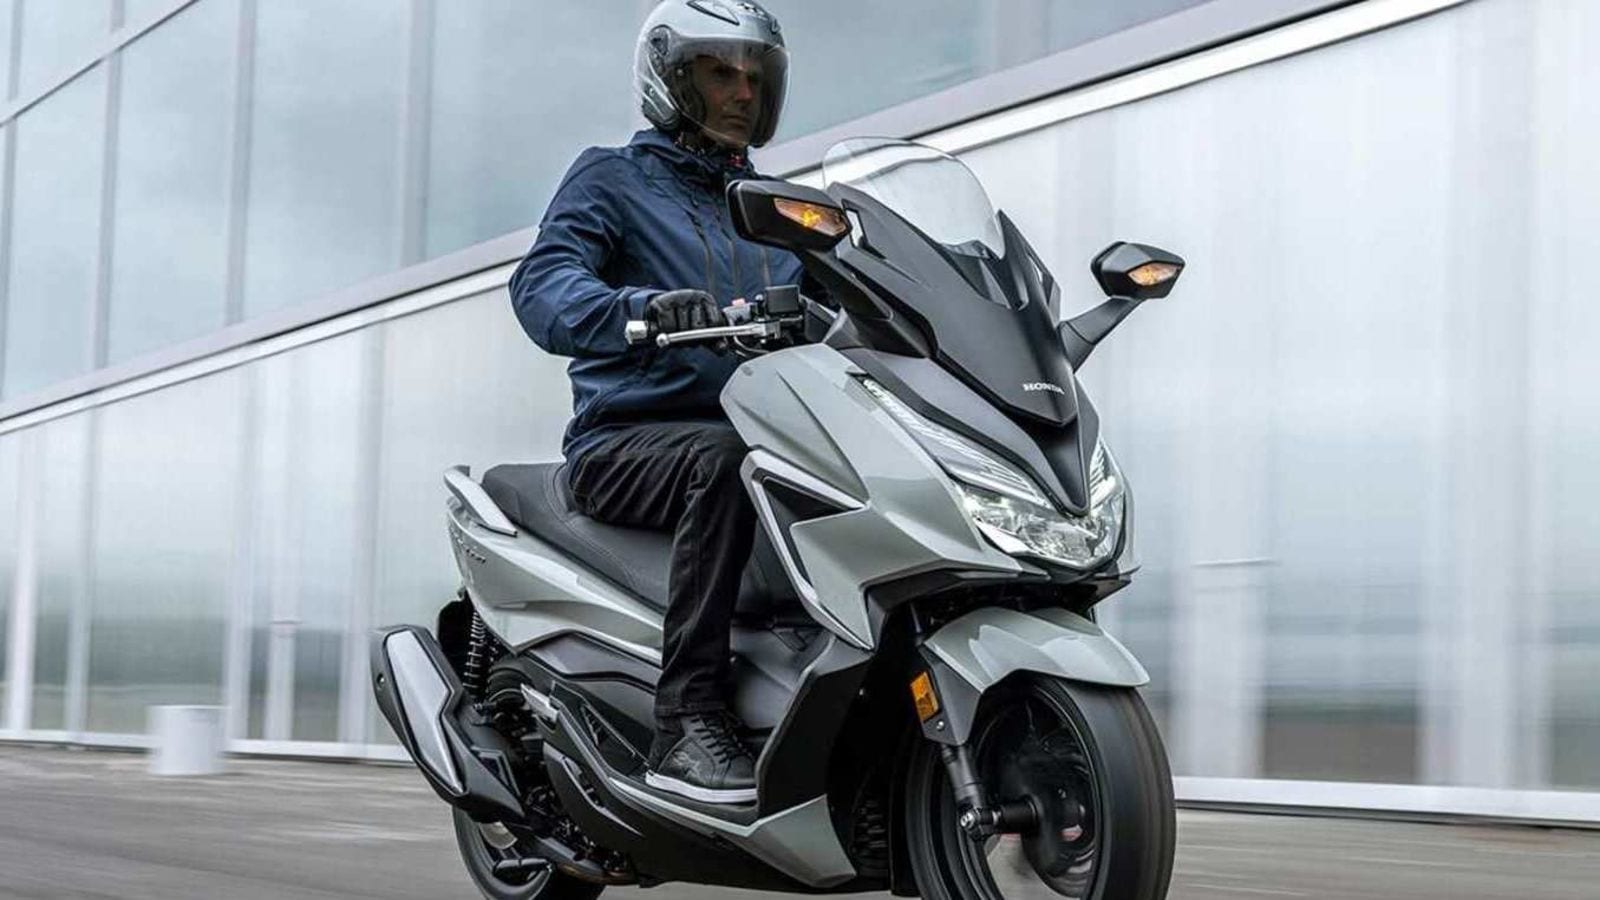 2021 Honda Forza 350 maxi-style scooter goes official in Thailand